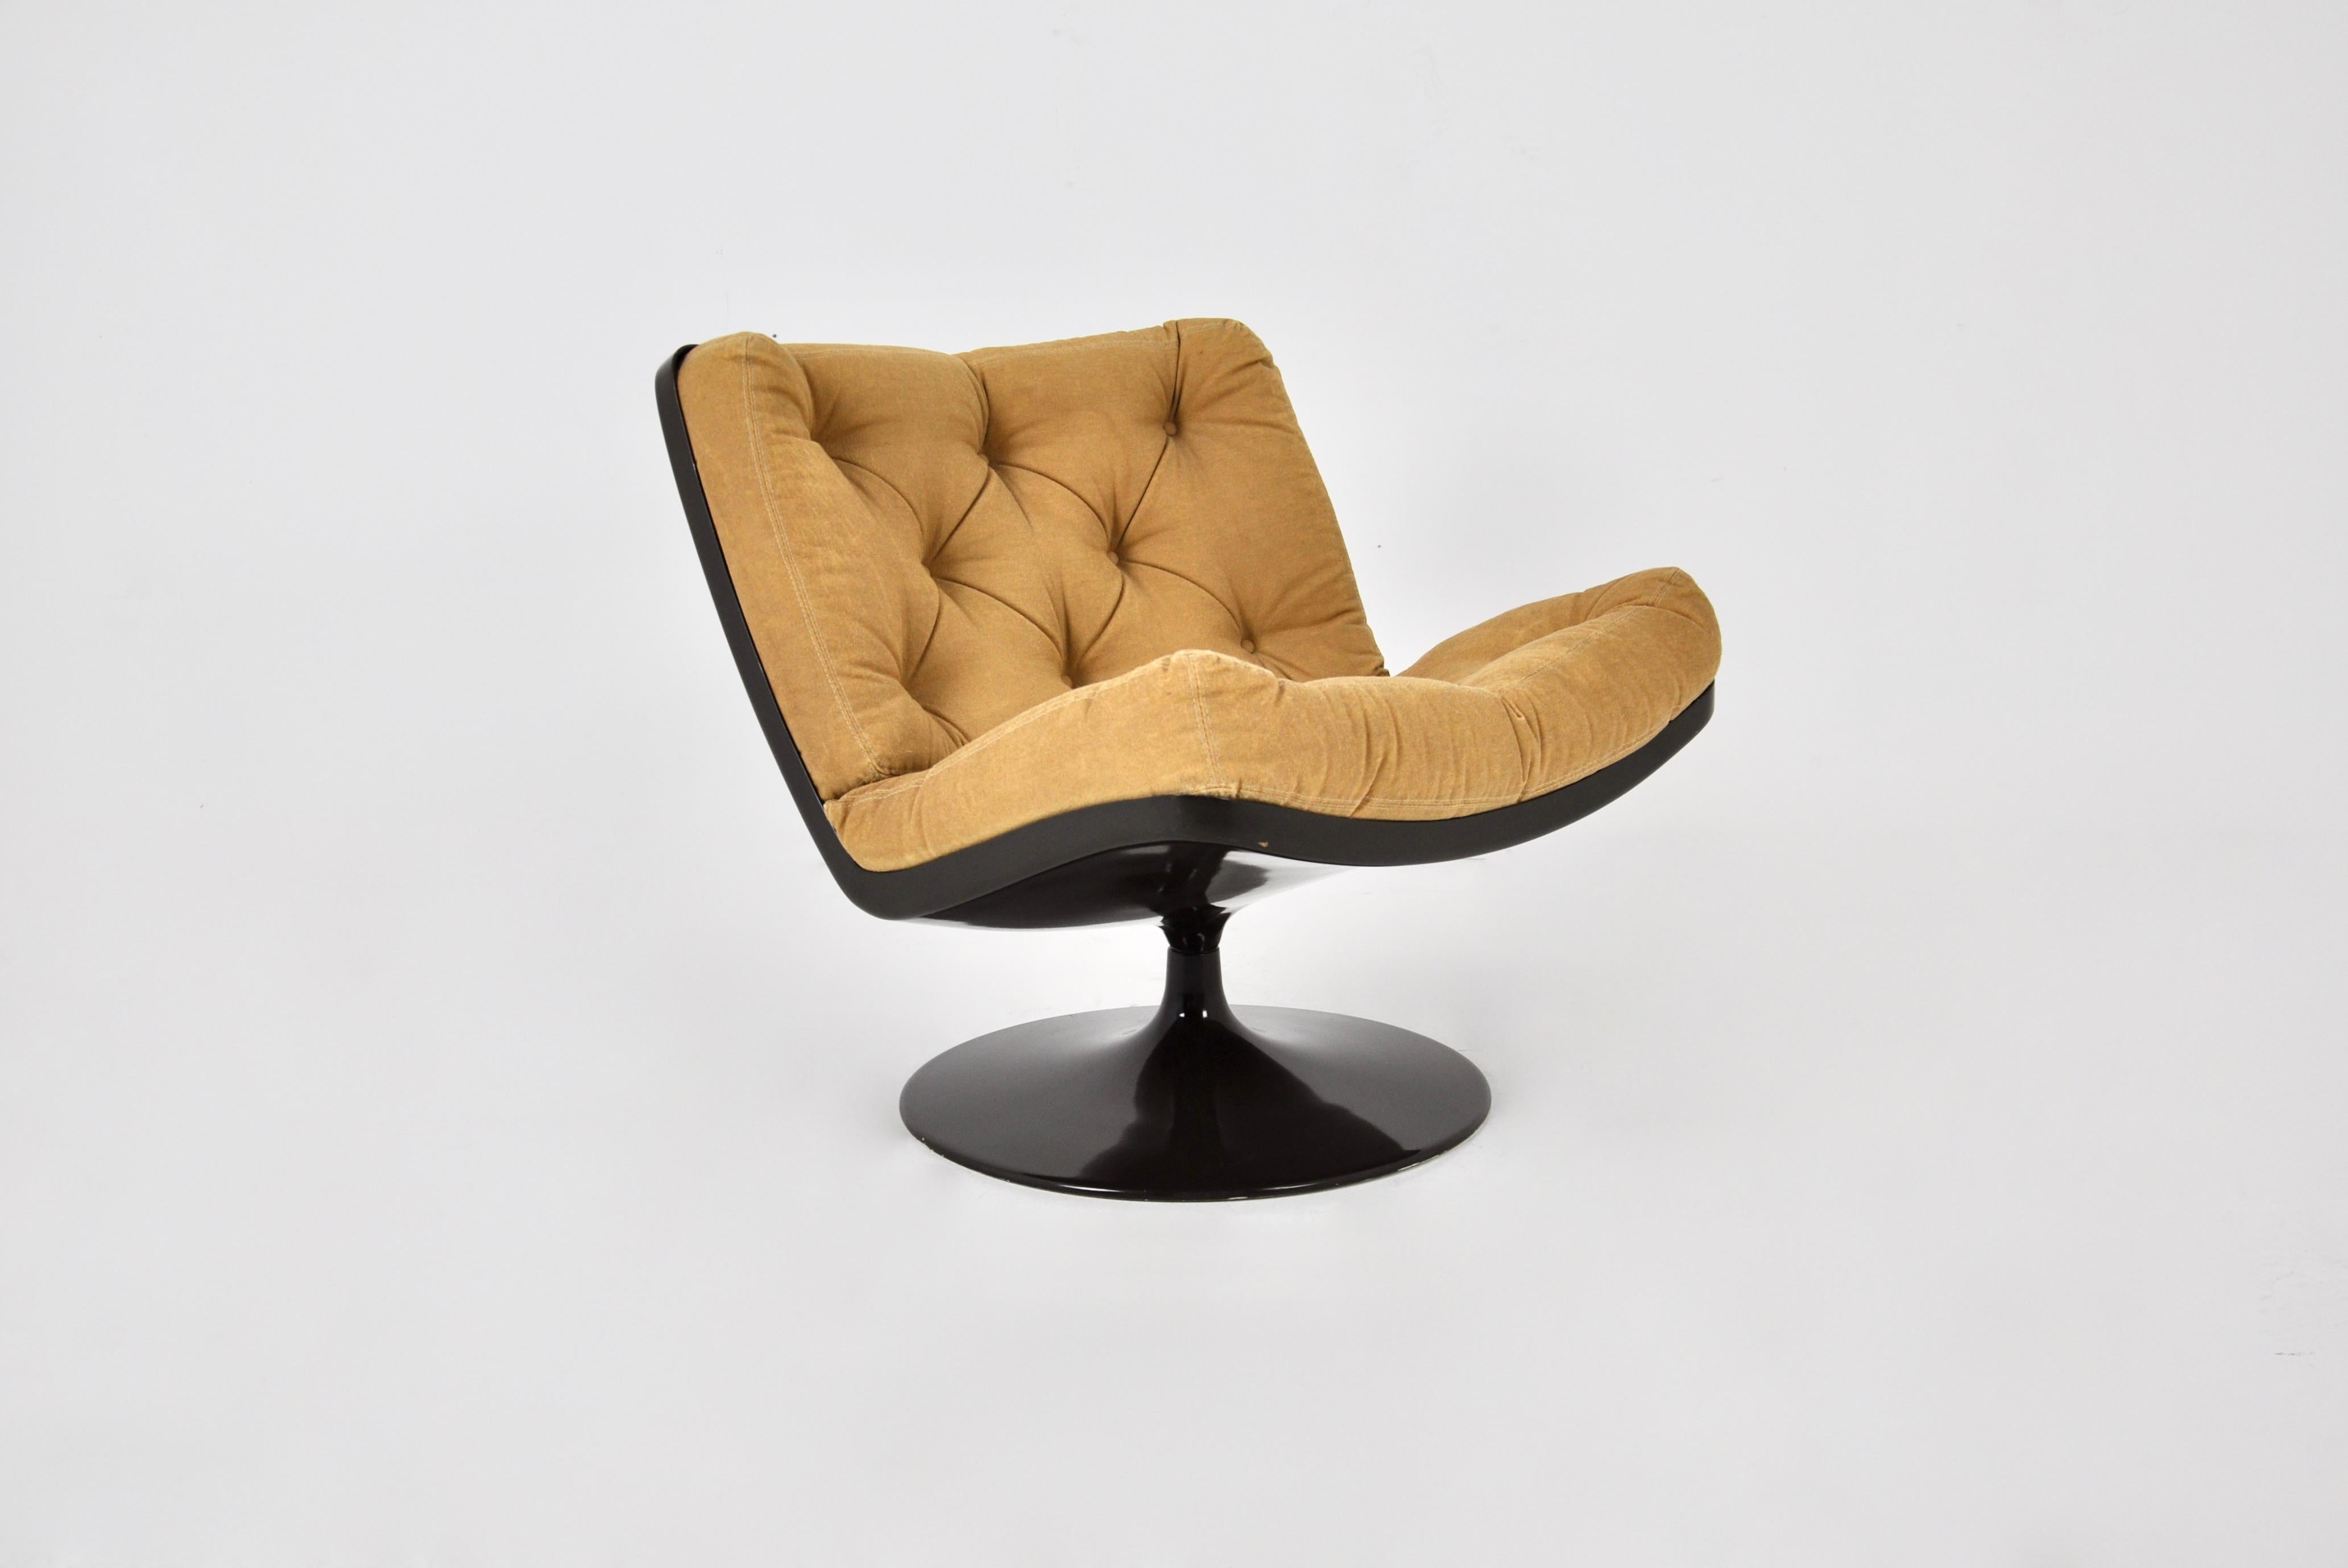 Swivel armchair in suede and plastic shell. Wear due to time and age. Dimensions: Seat height 44cm.
  